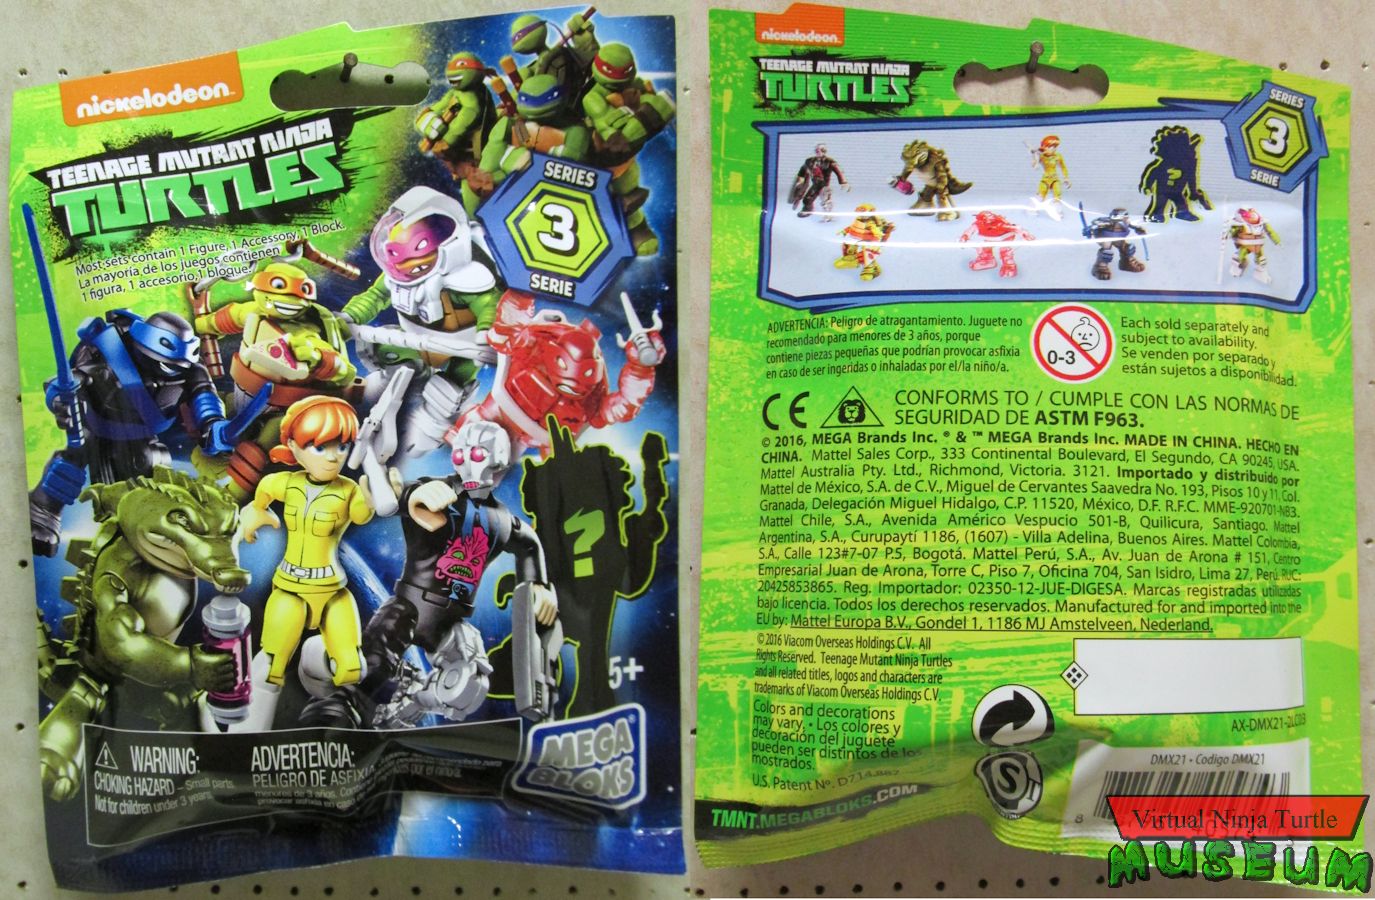 Series 3 blind bag package front and back